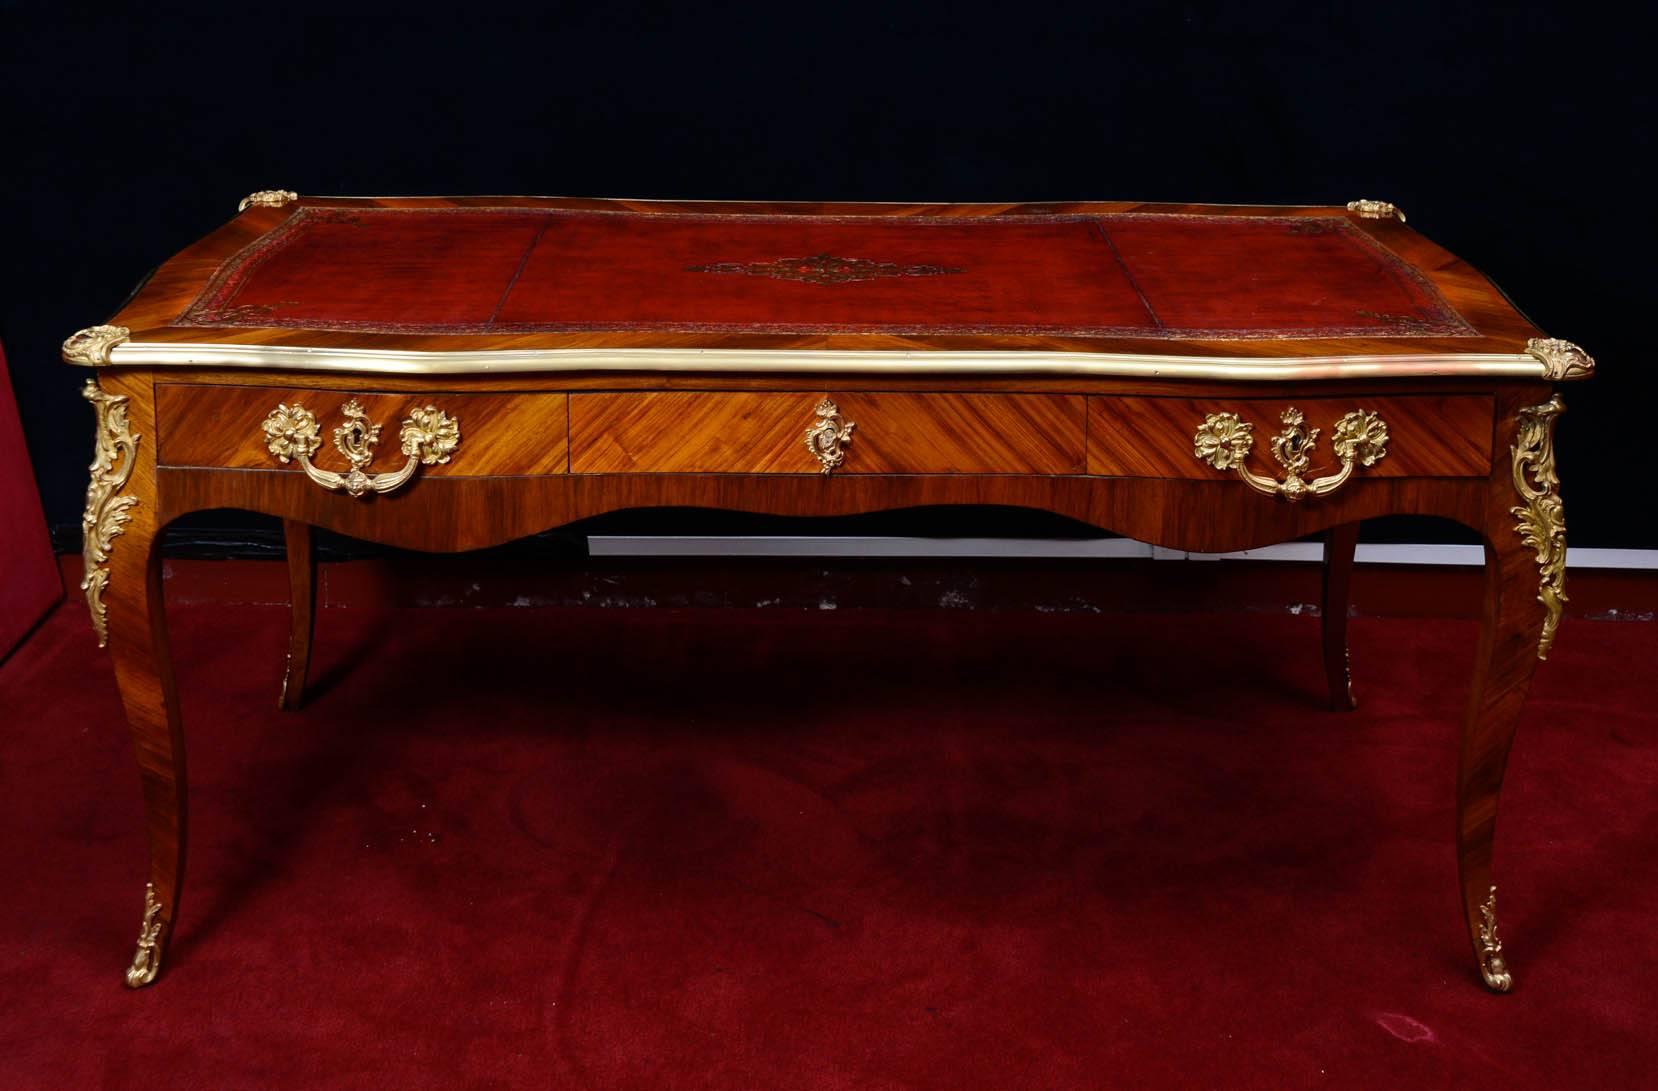 Writing desk, style Louis XV, early 19th century, gold gilt bronze mounts, exotic wood inlays with a leather embossed writing surface.
 